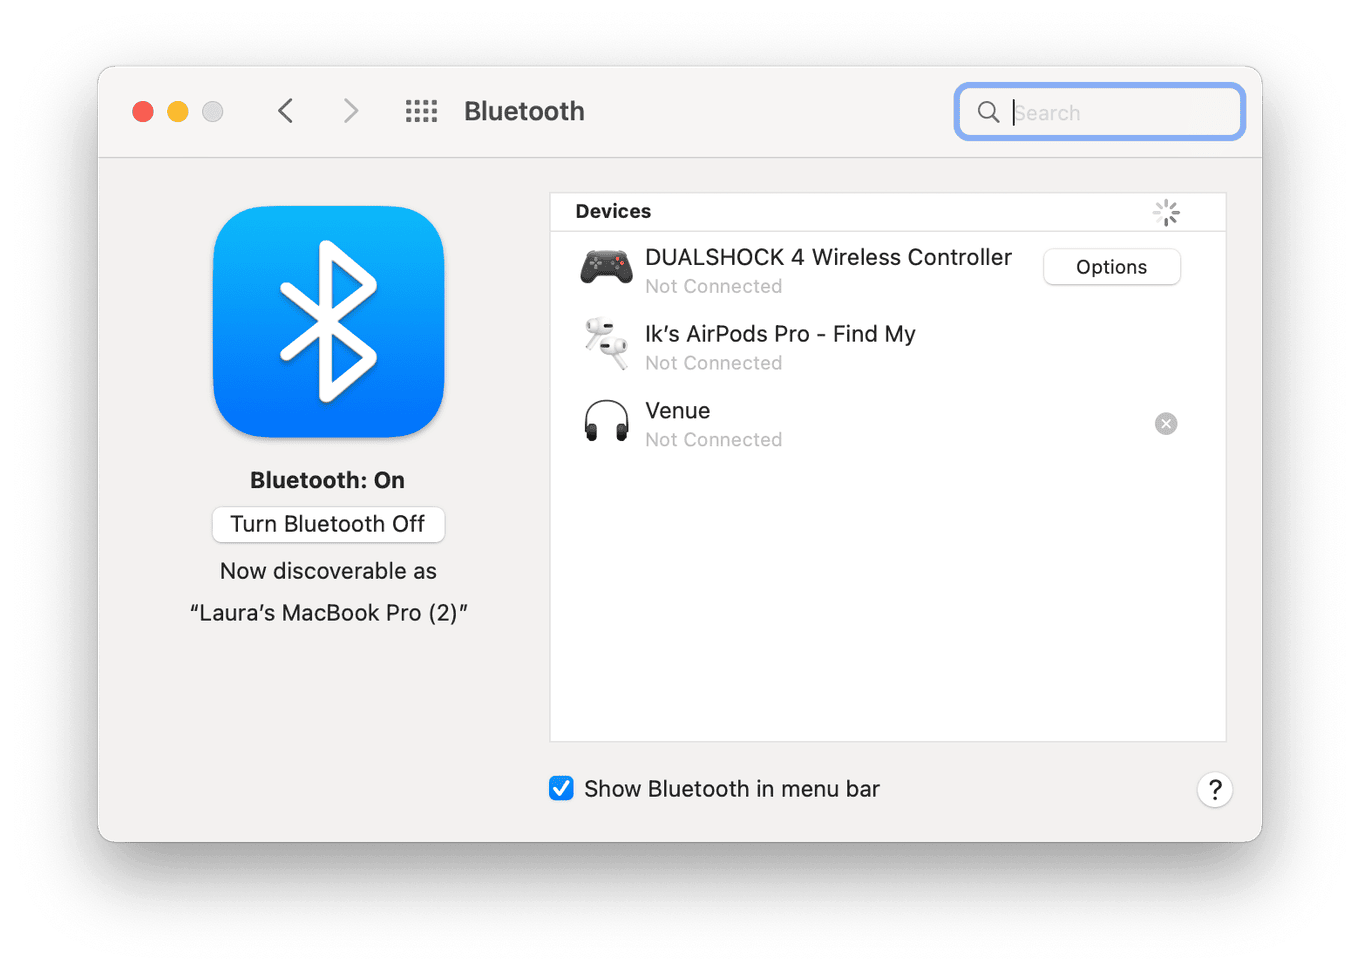 Disconnecting Bluetooth devices